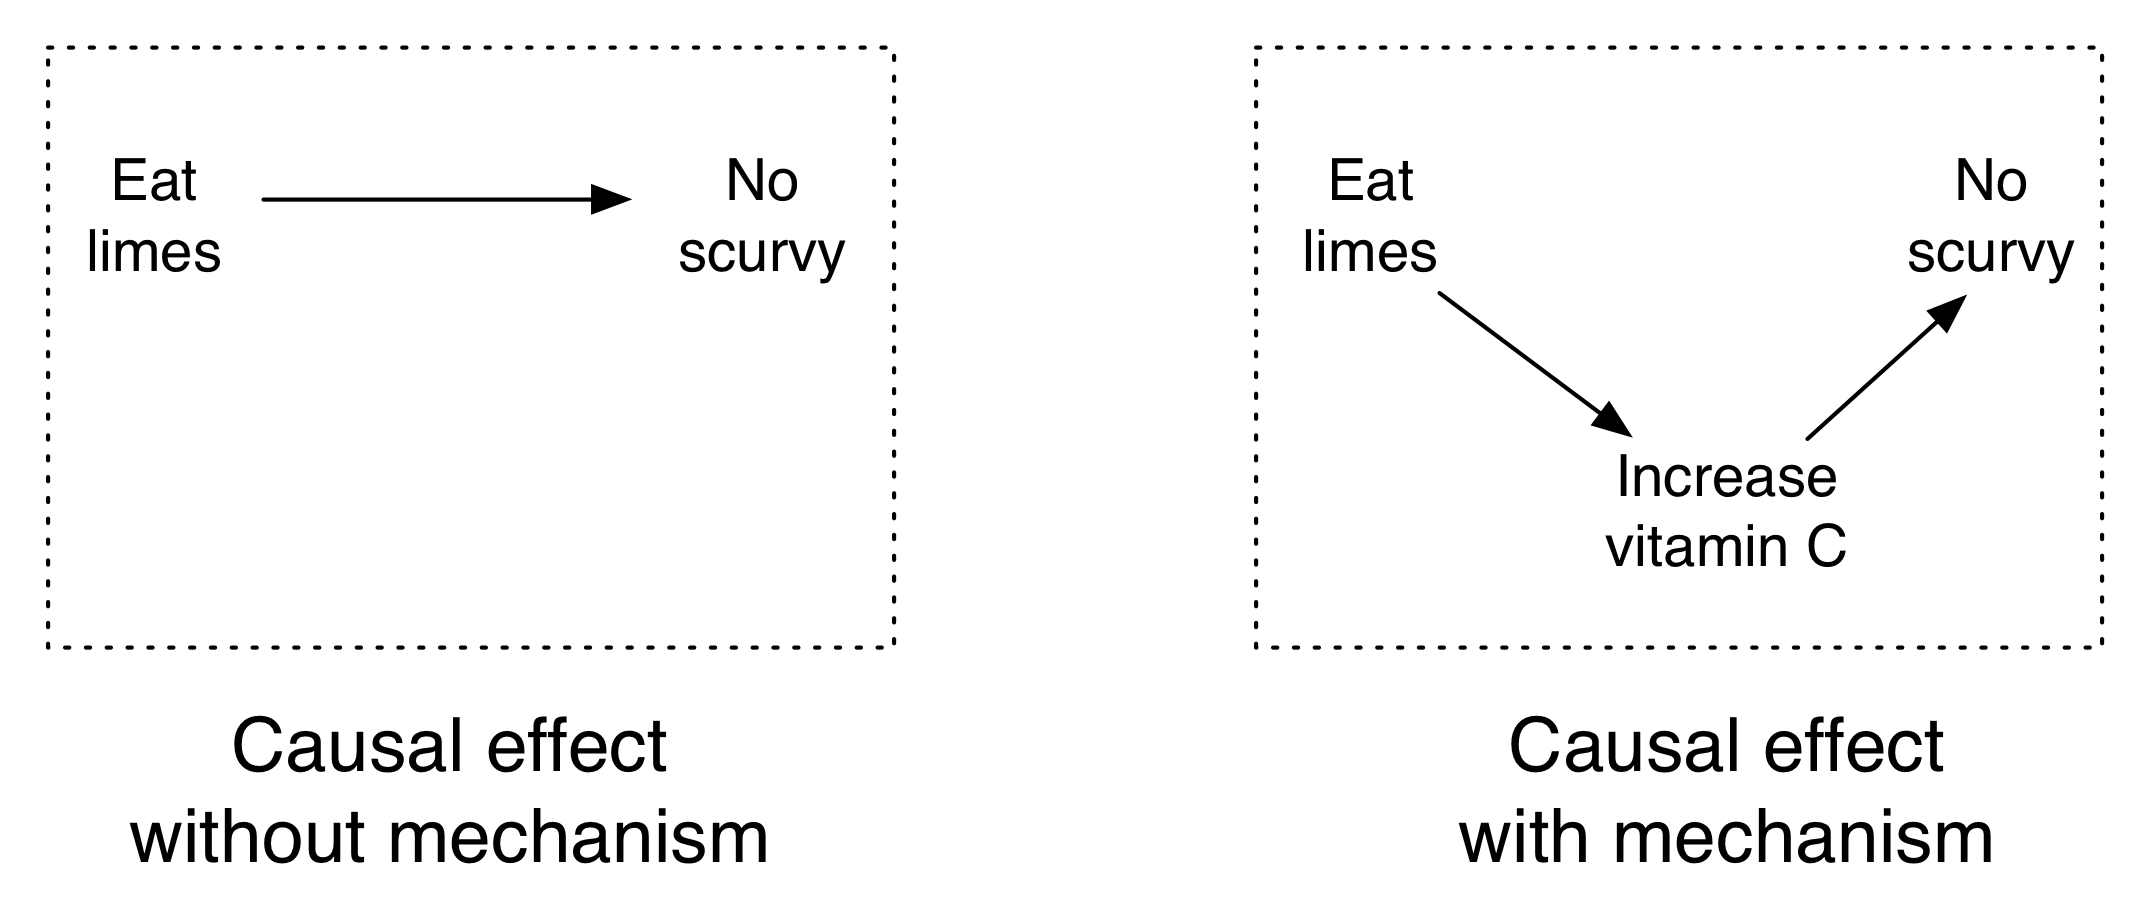 Figure 4.10: Limes prevent scurvy and the mechanism is vitamin C.